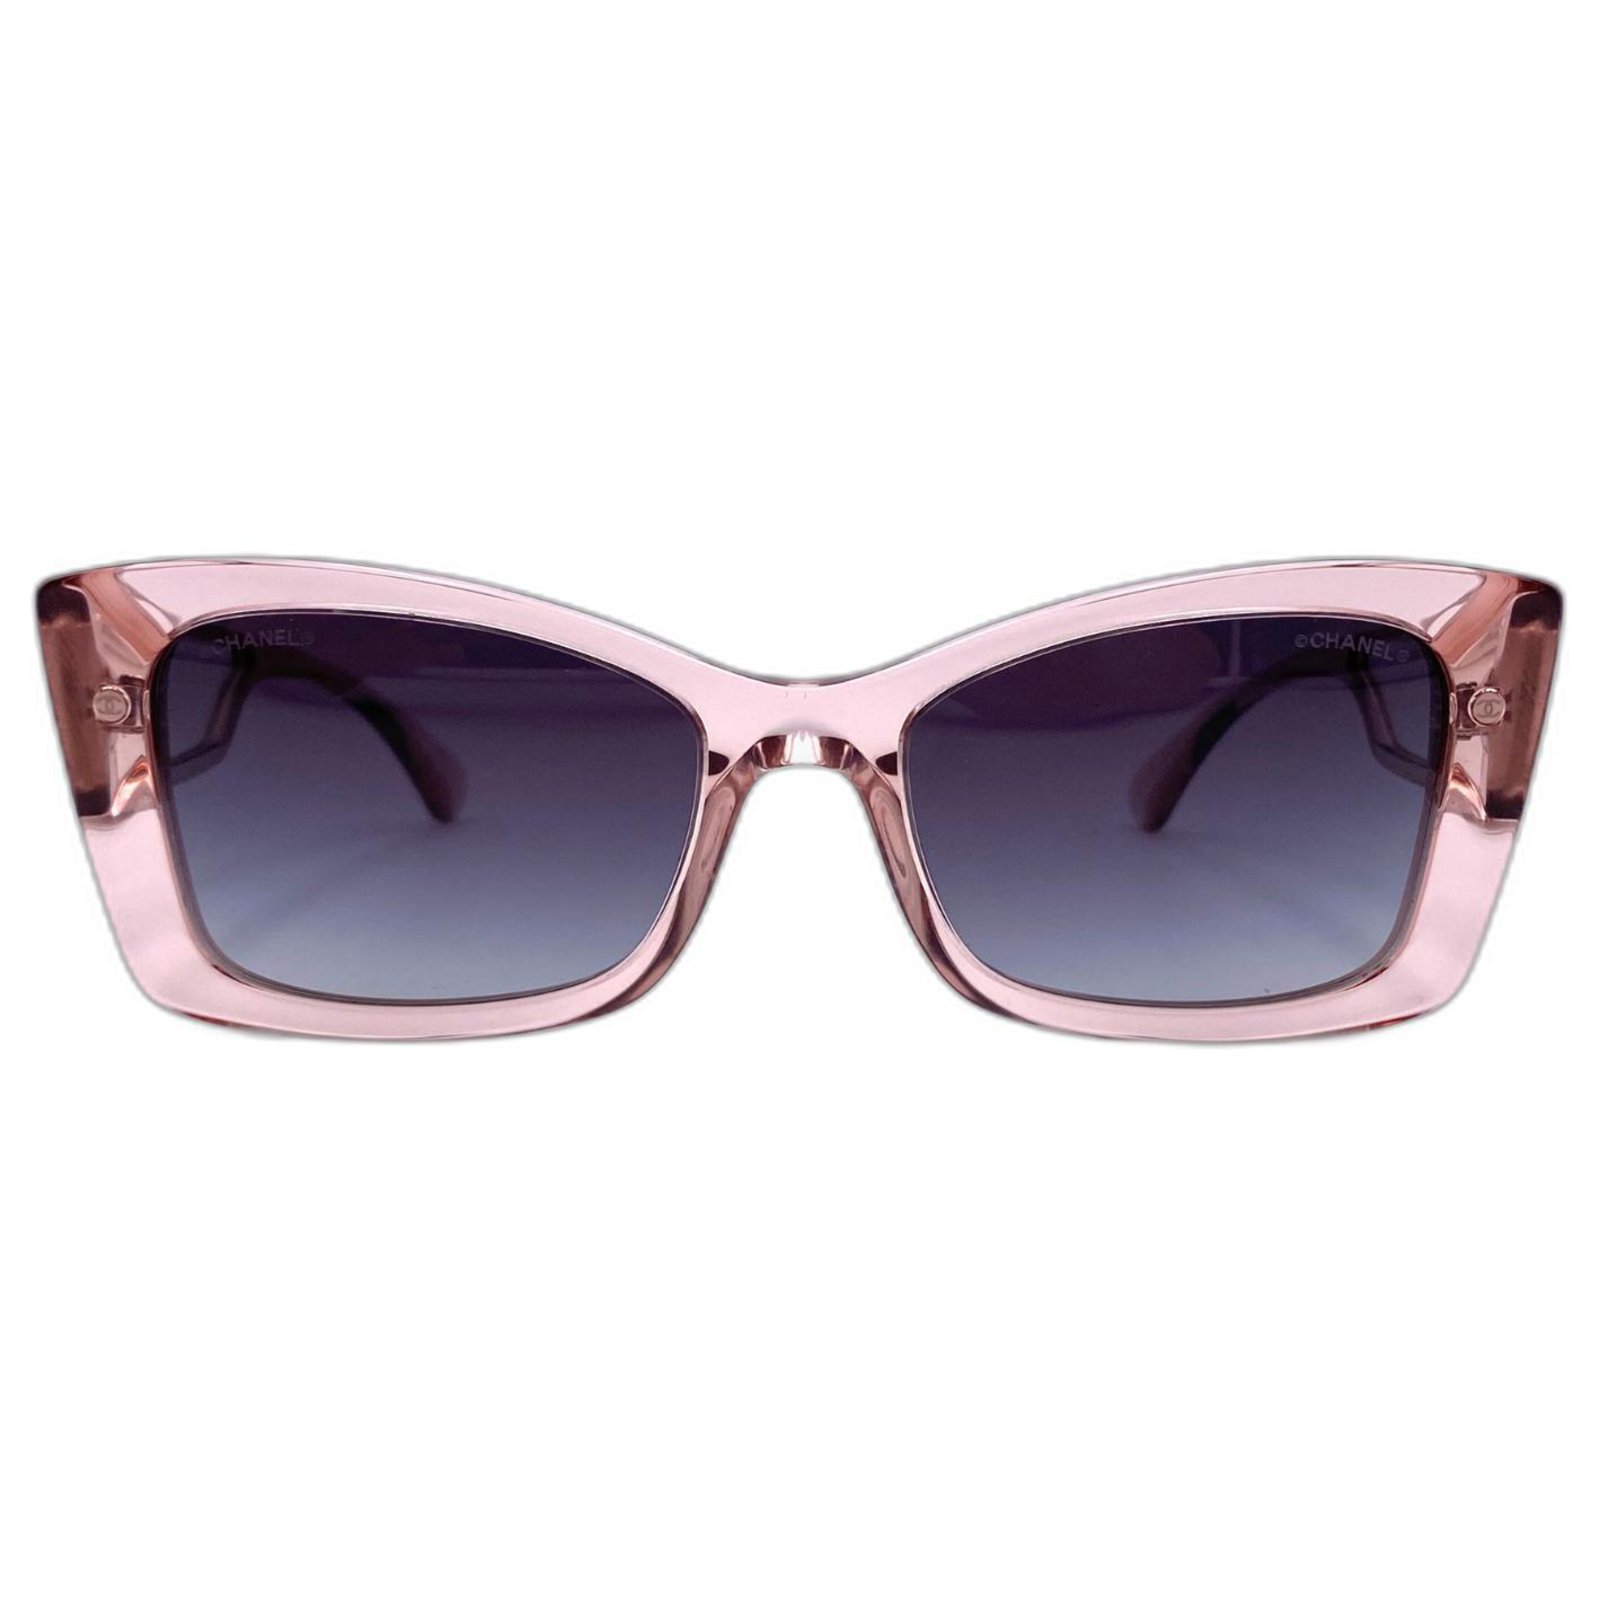 Chanel CH5430 Sunglasses, (Discontinued)